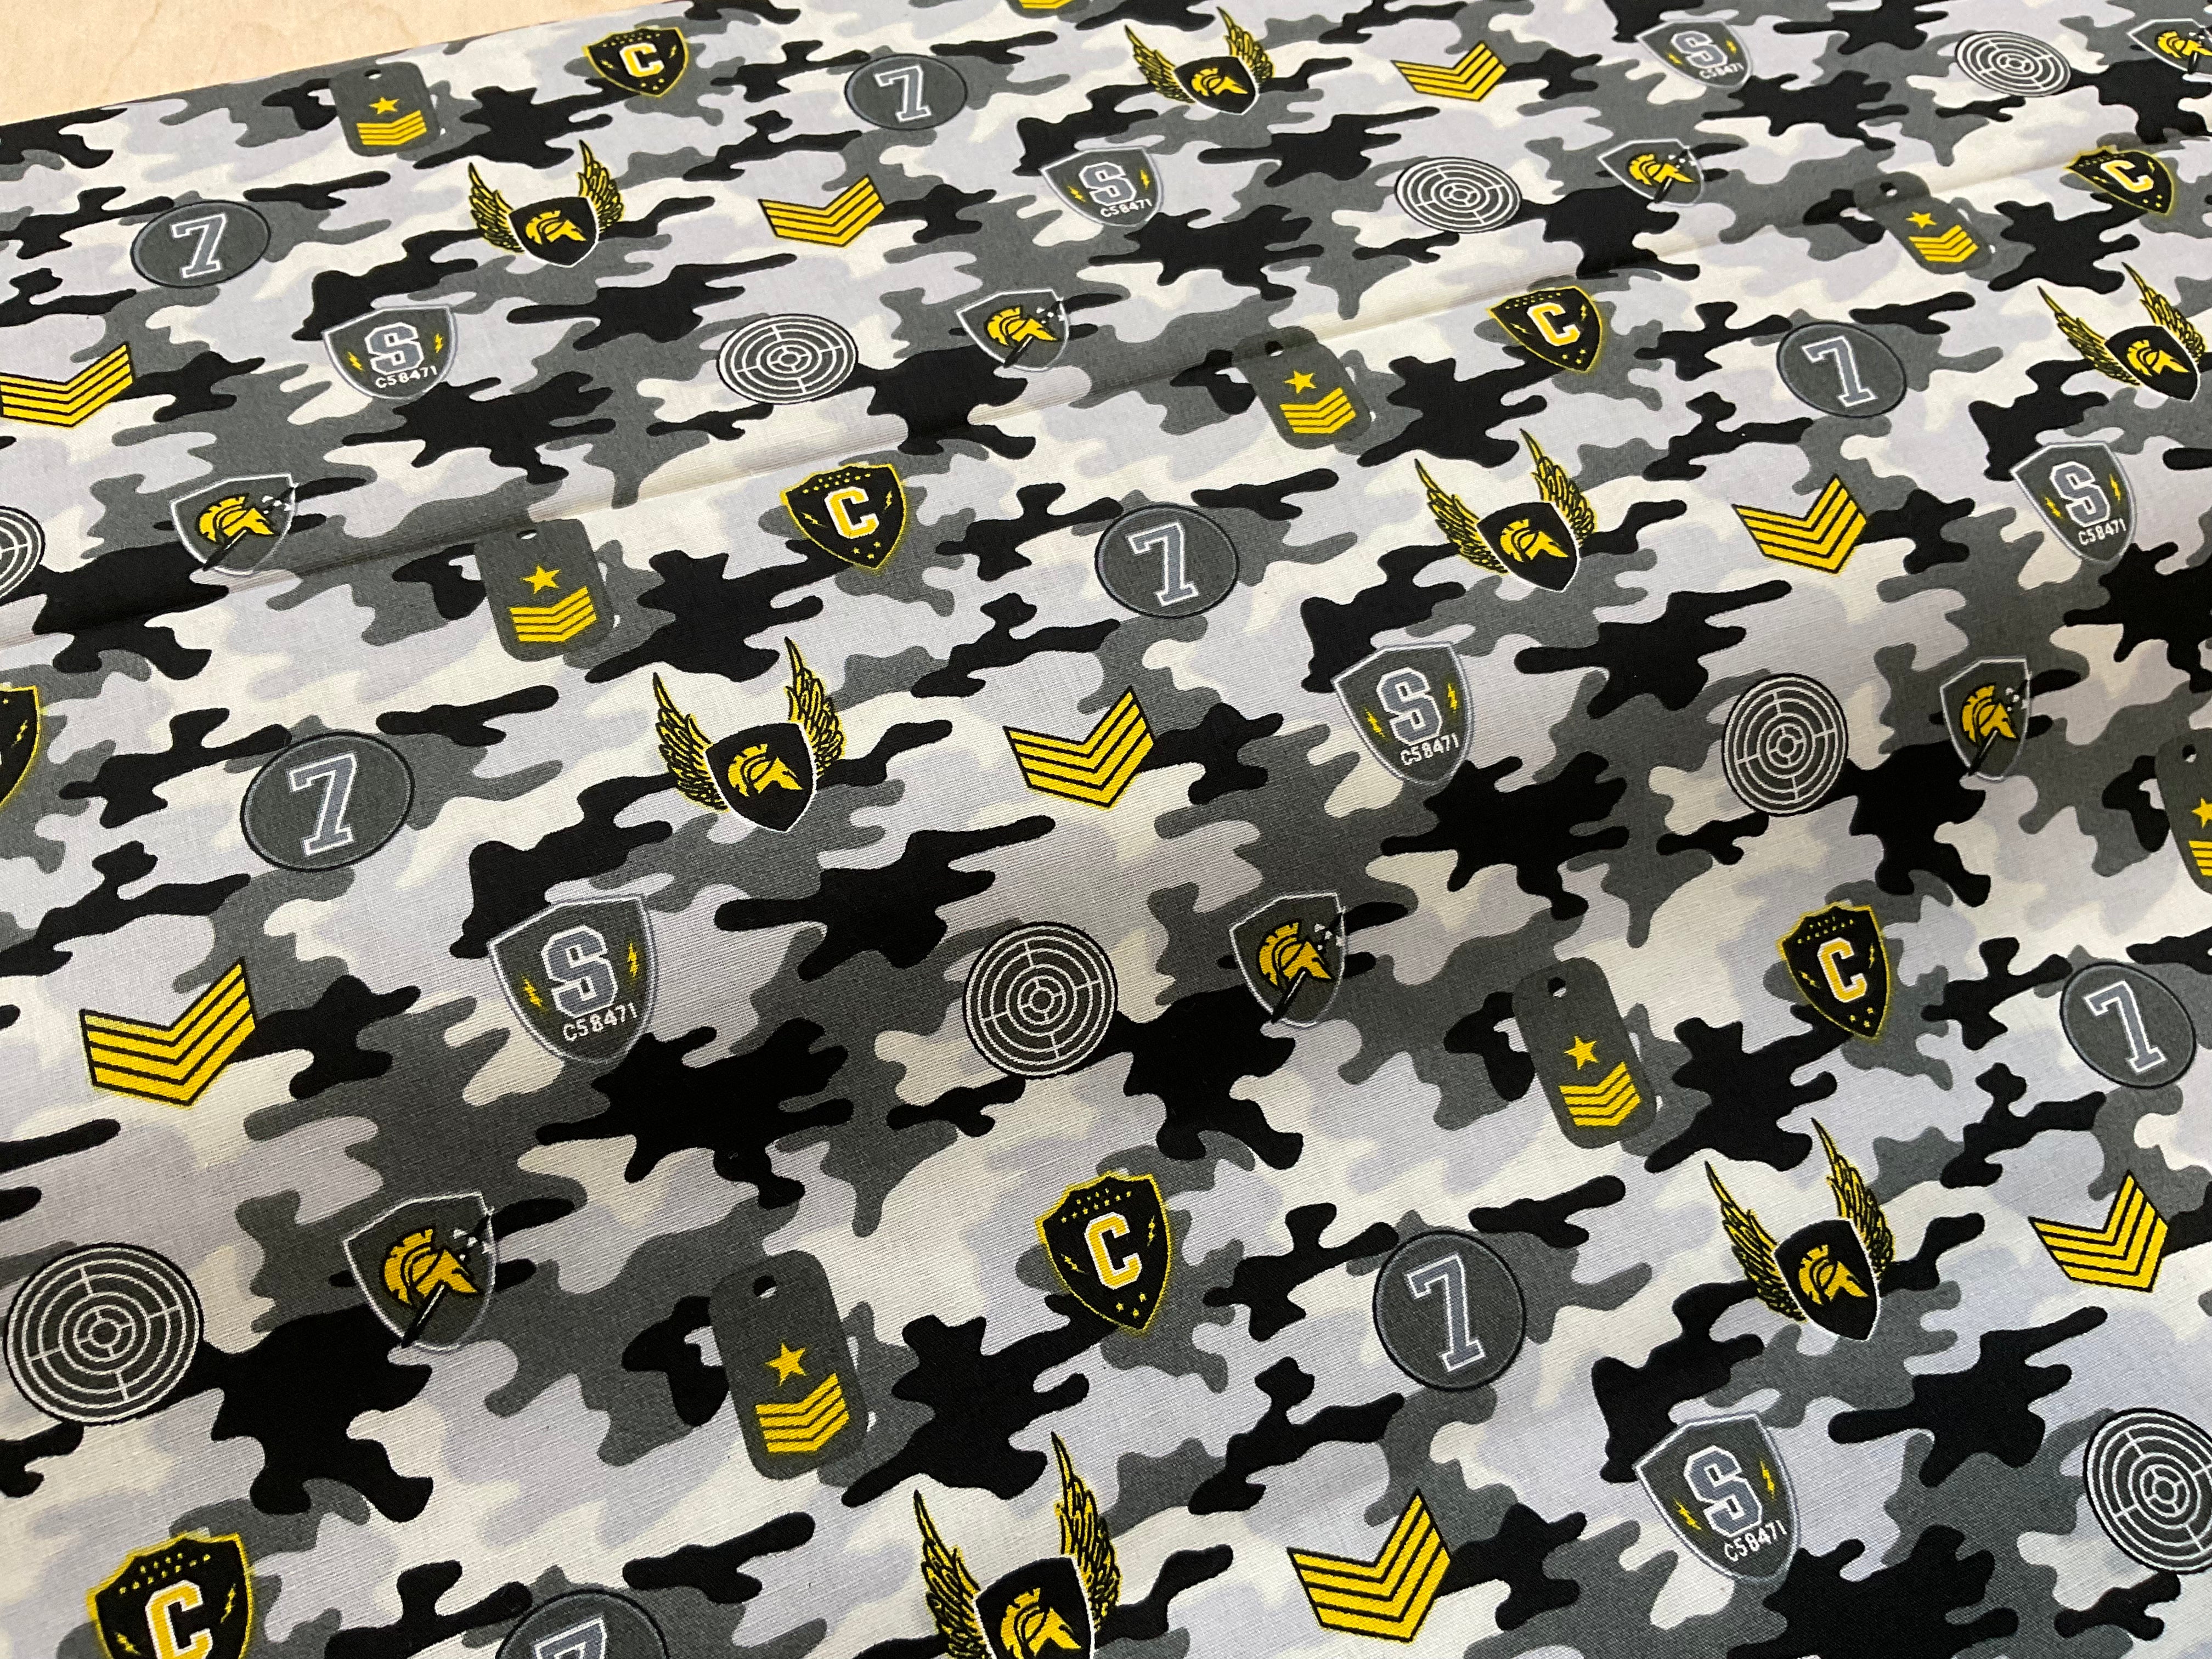 SALE - Army Badges on camouflage Cotton Poplin